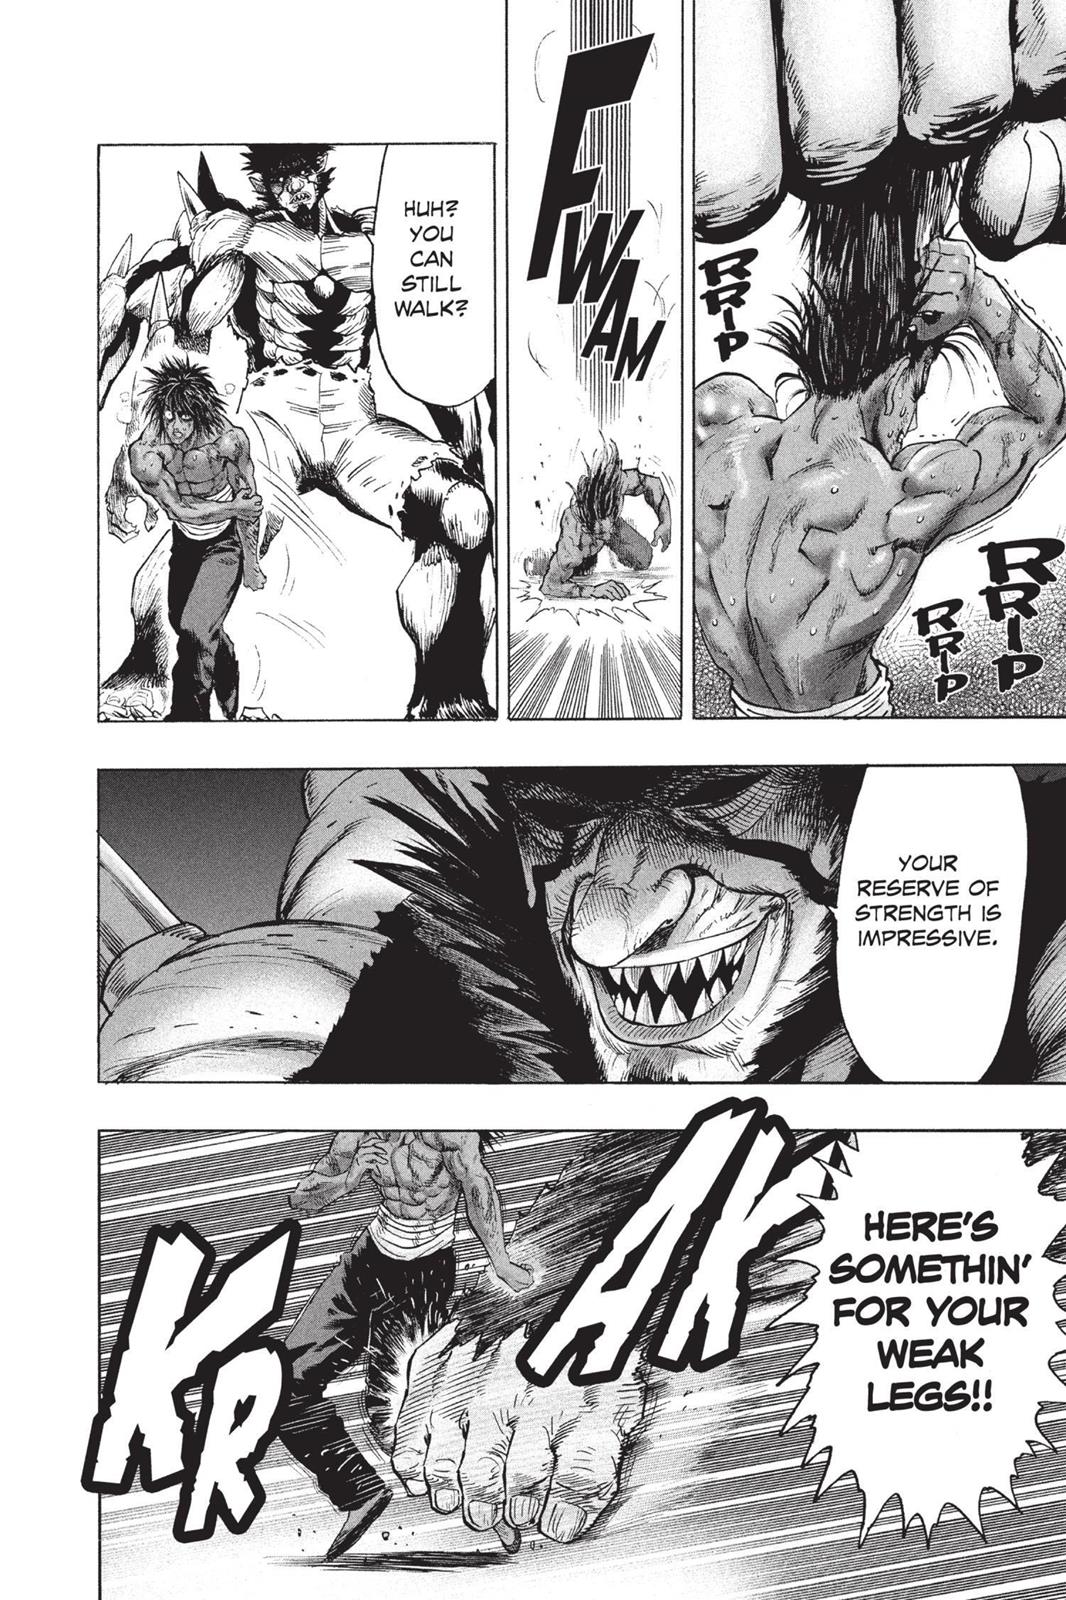 One-Punch Man, Punch 74 image 23